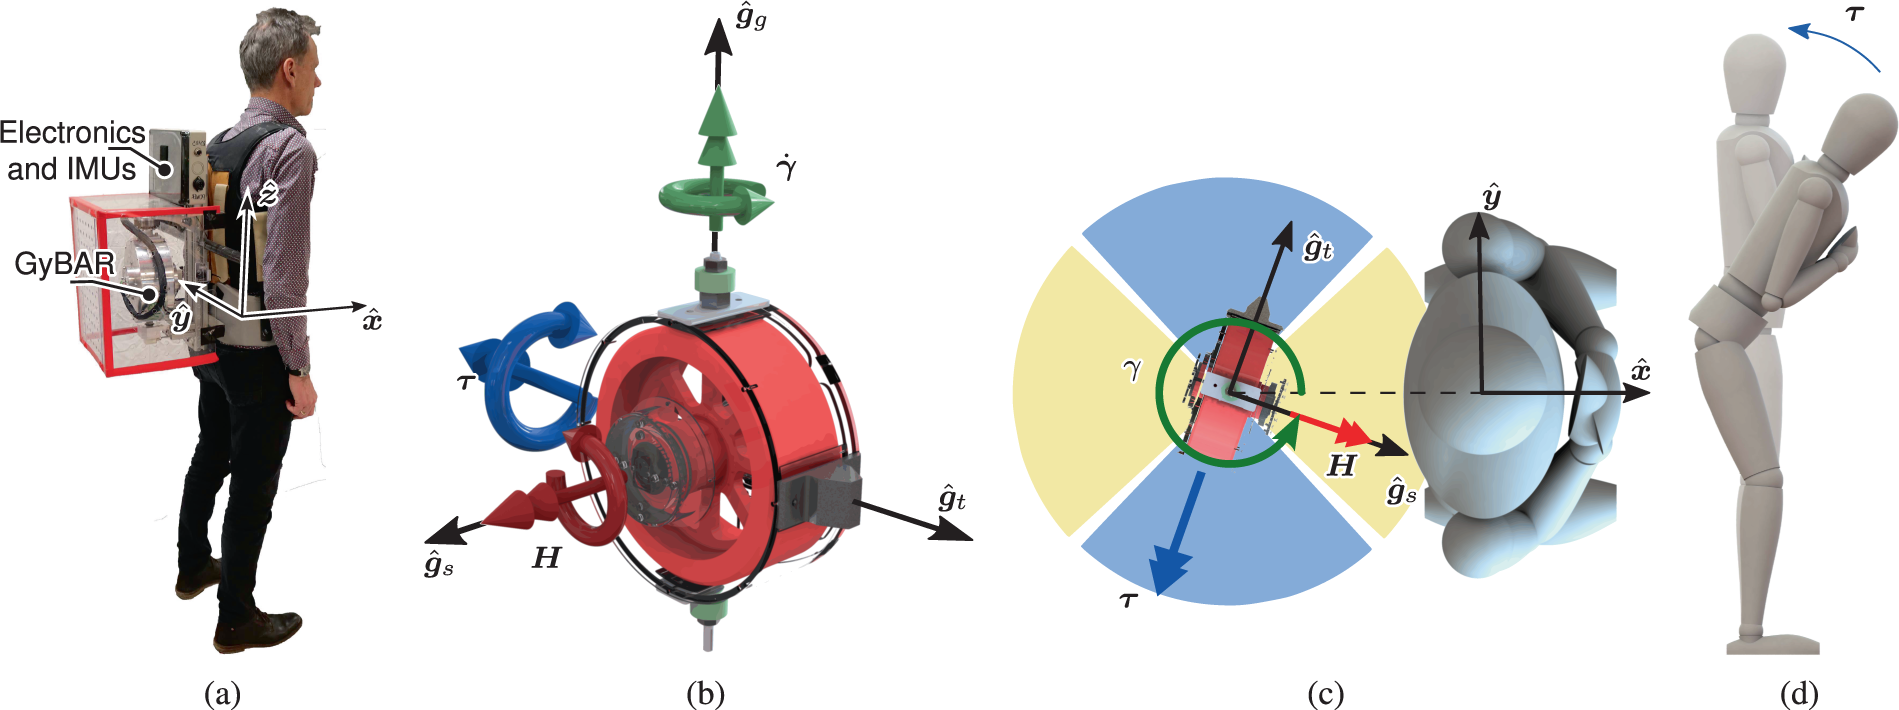 Controller synthesis and clinical exploration of wearable gyroscopic  actuators to support human balance | Scientific Reports